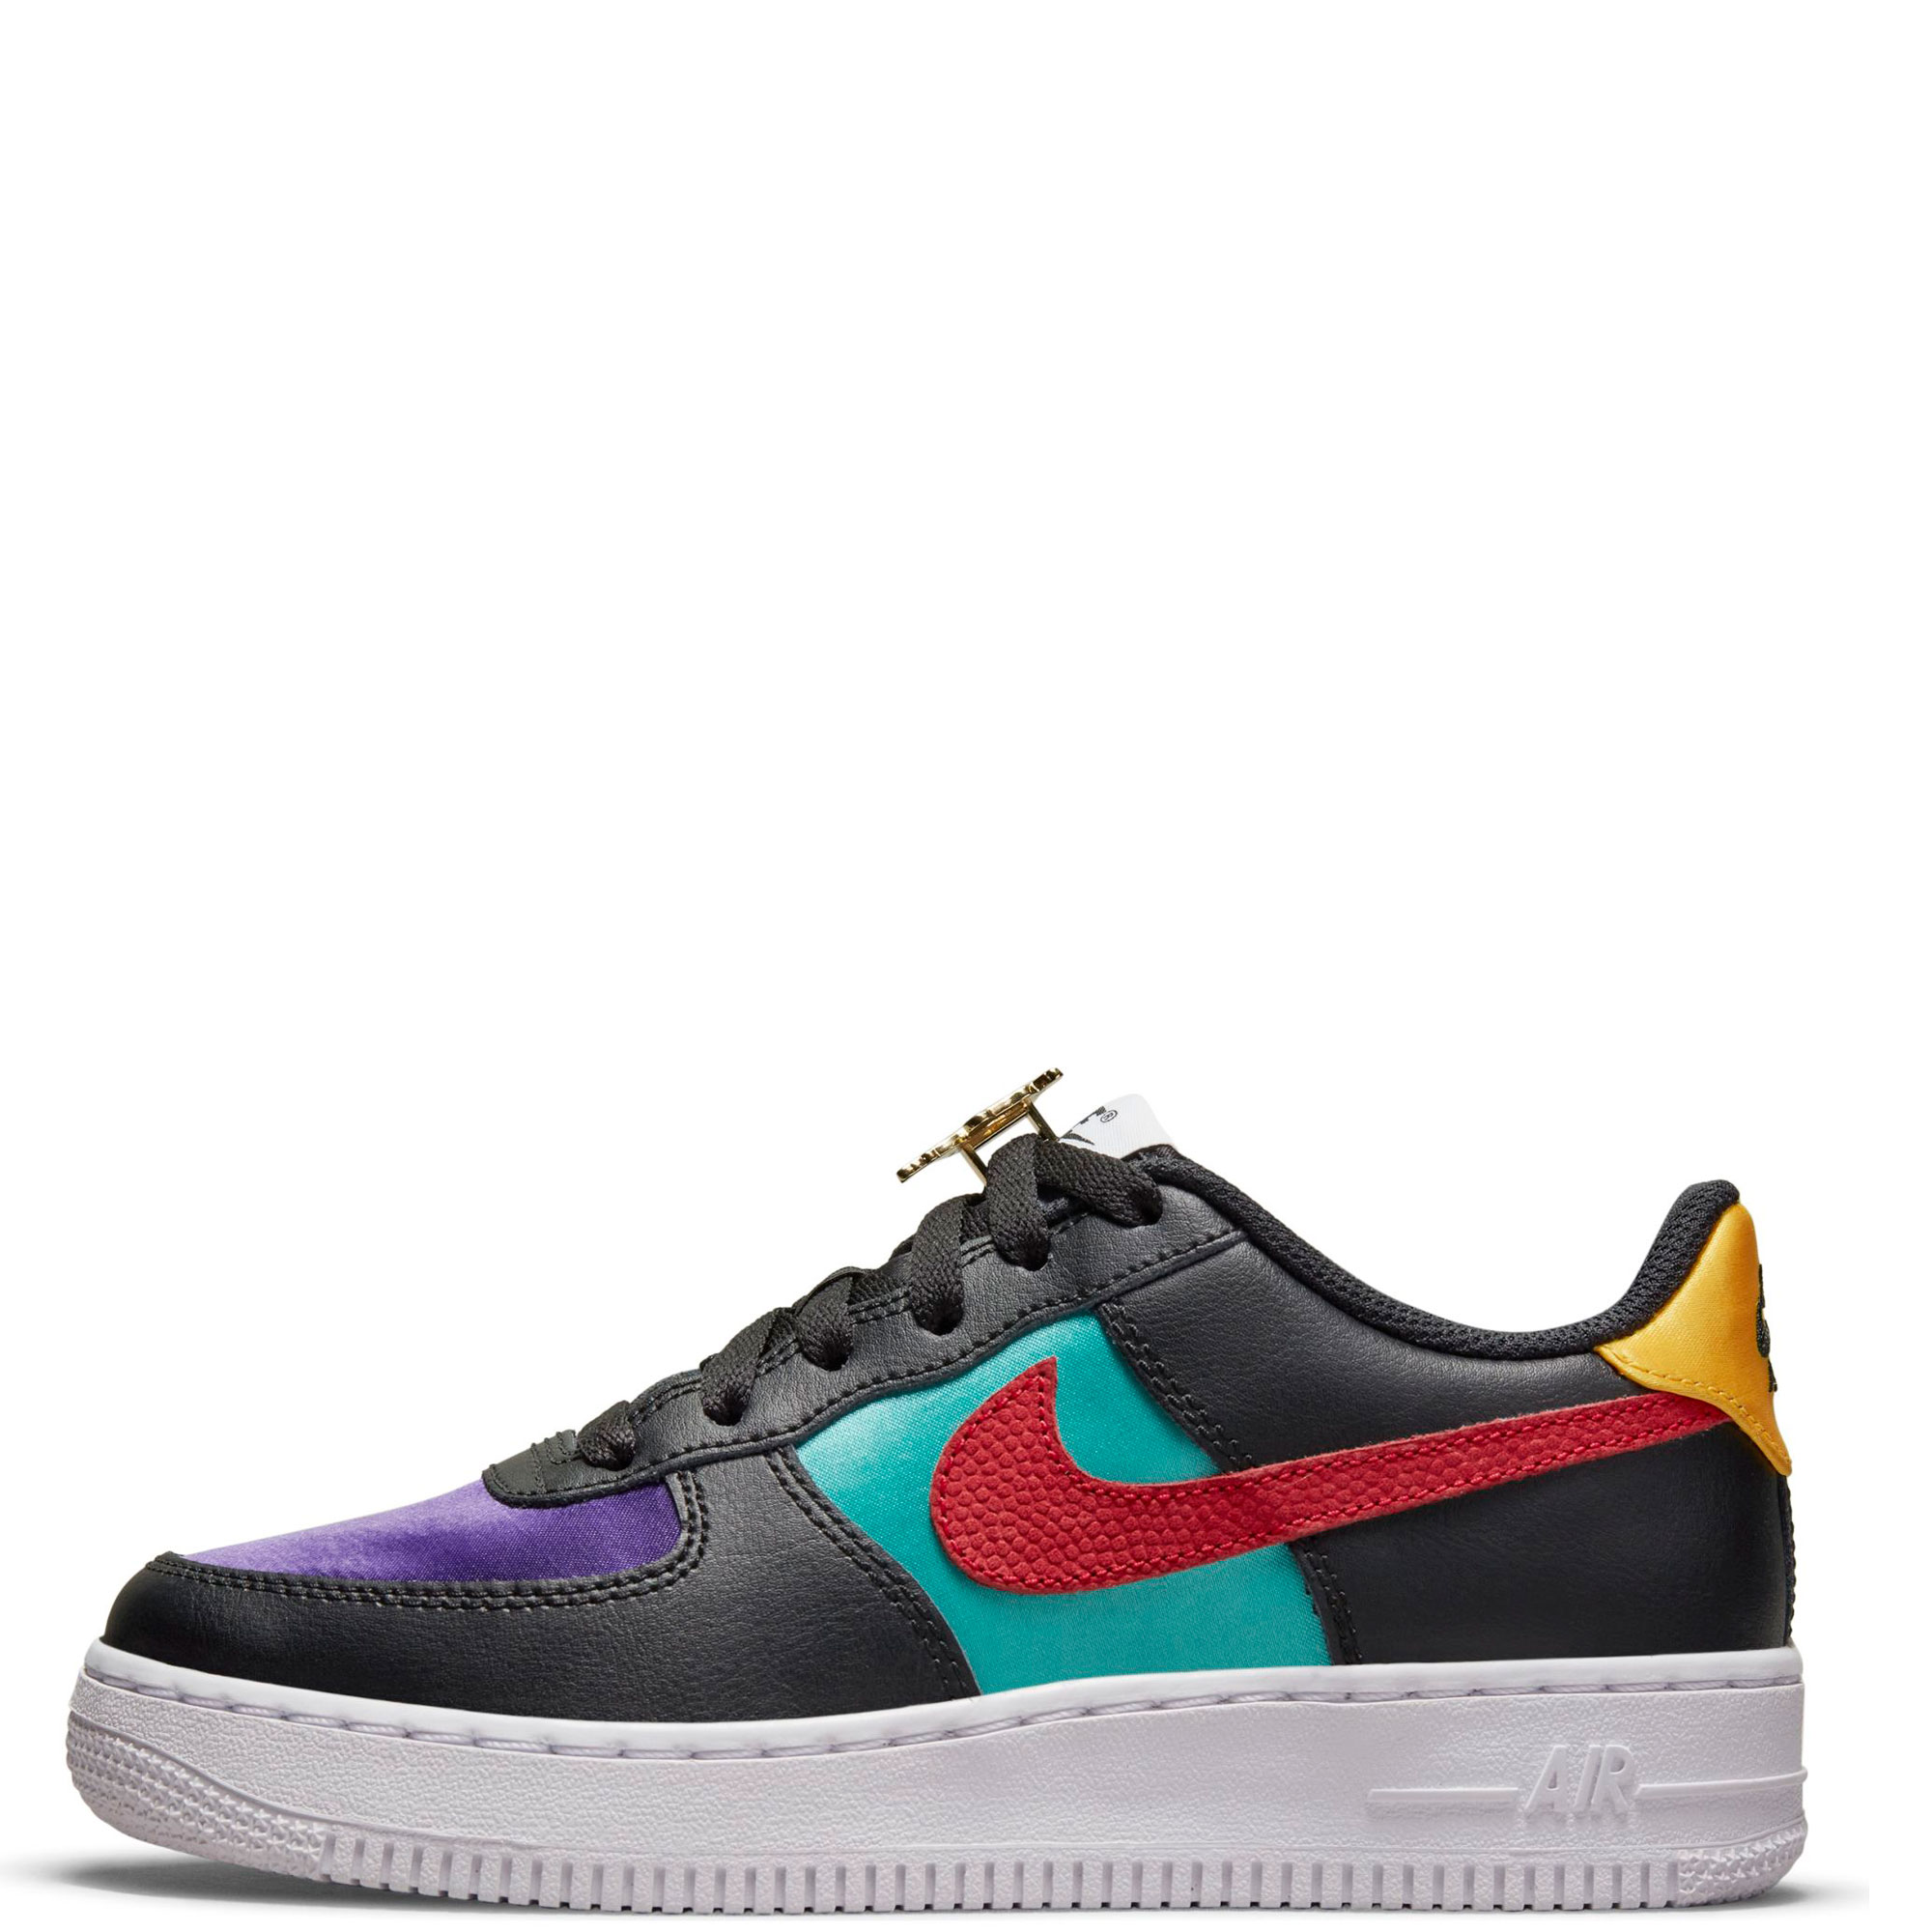 NWB - Nike Force 1 '06 LV8 Baby Toddler Shoes Black/Gym Red-Washed  Teal- Size 6C